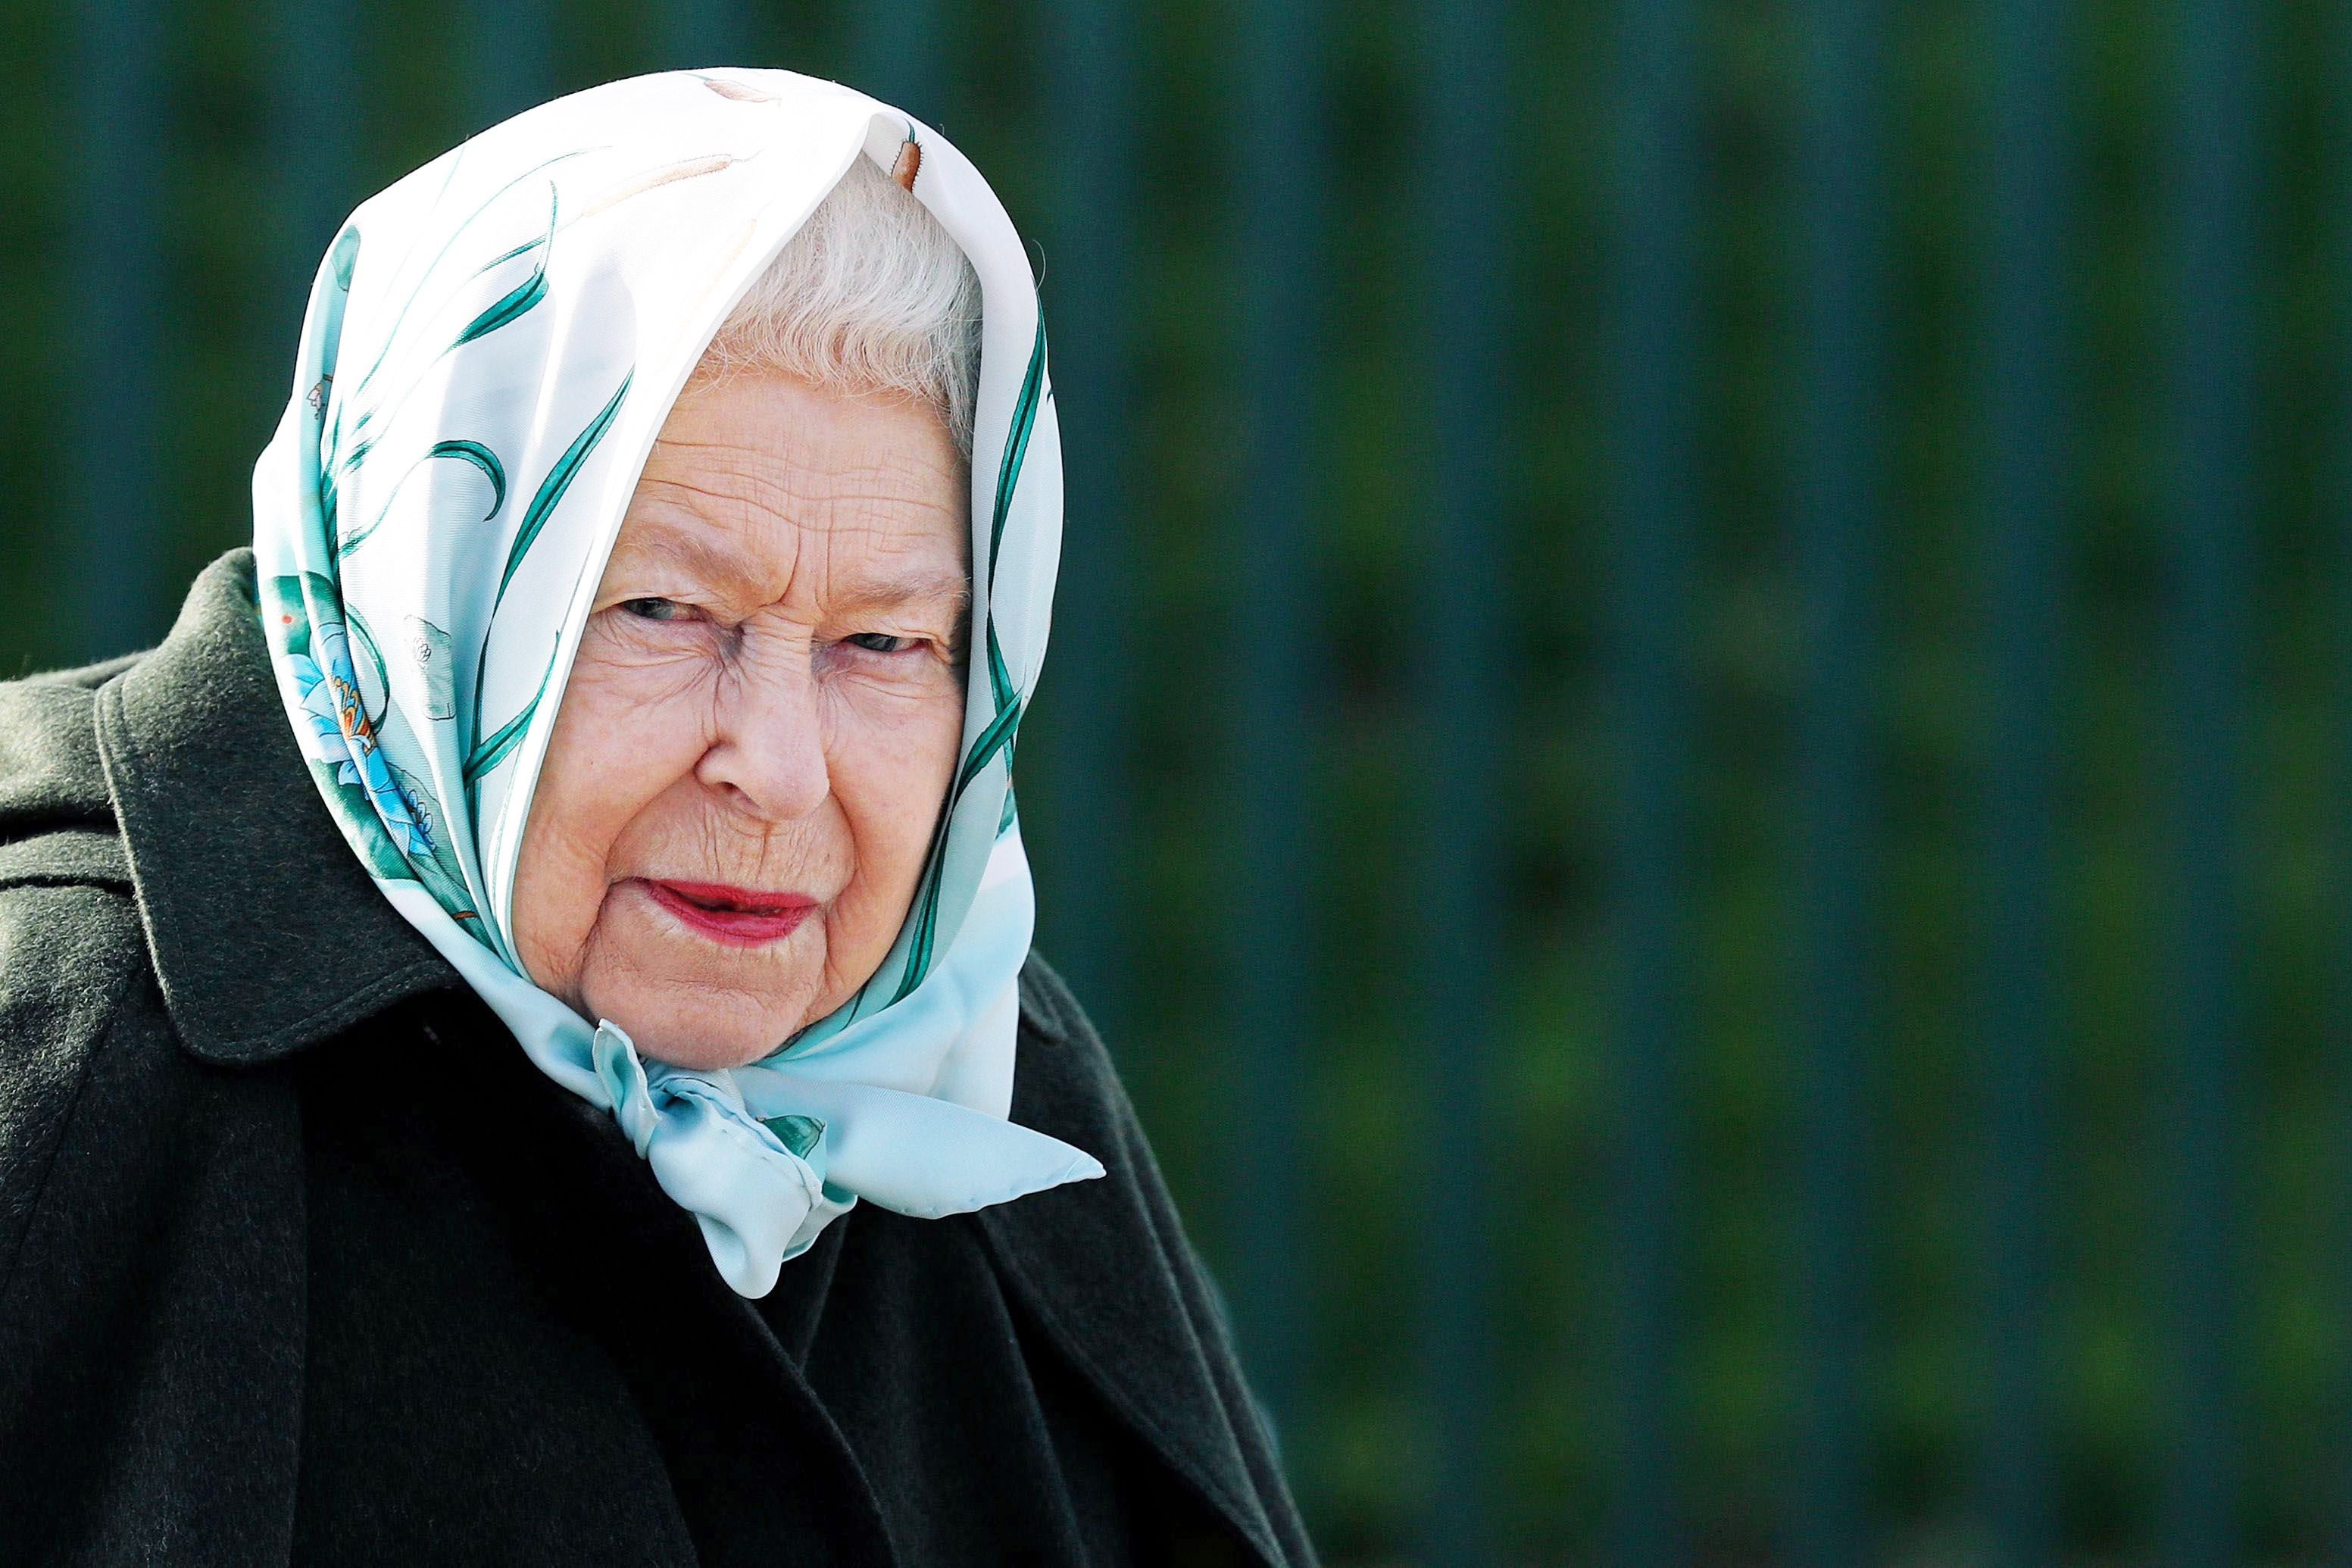 The Queen May Never Return To Public Duty Because Of Coronavirus